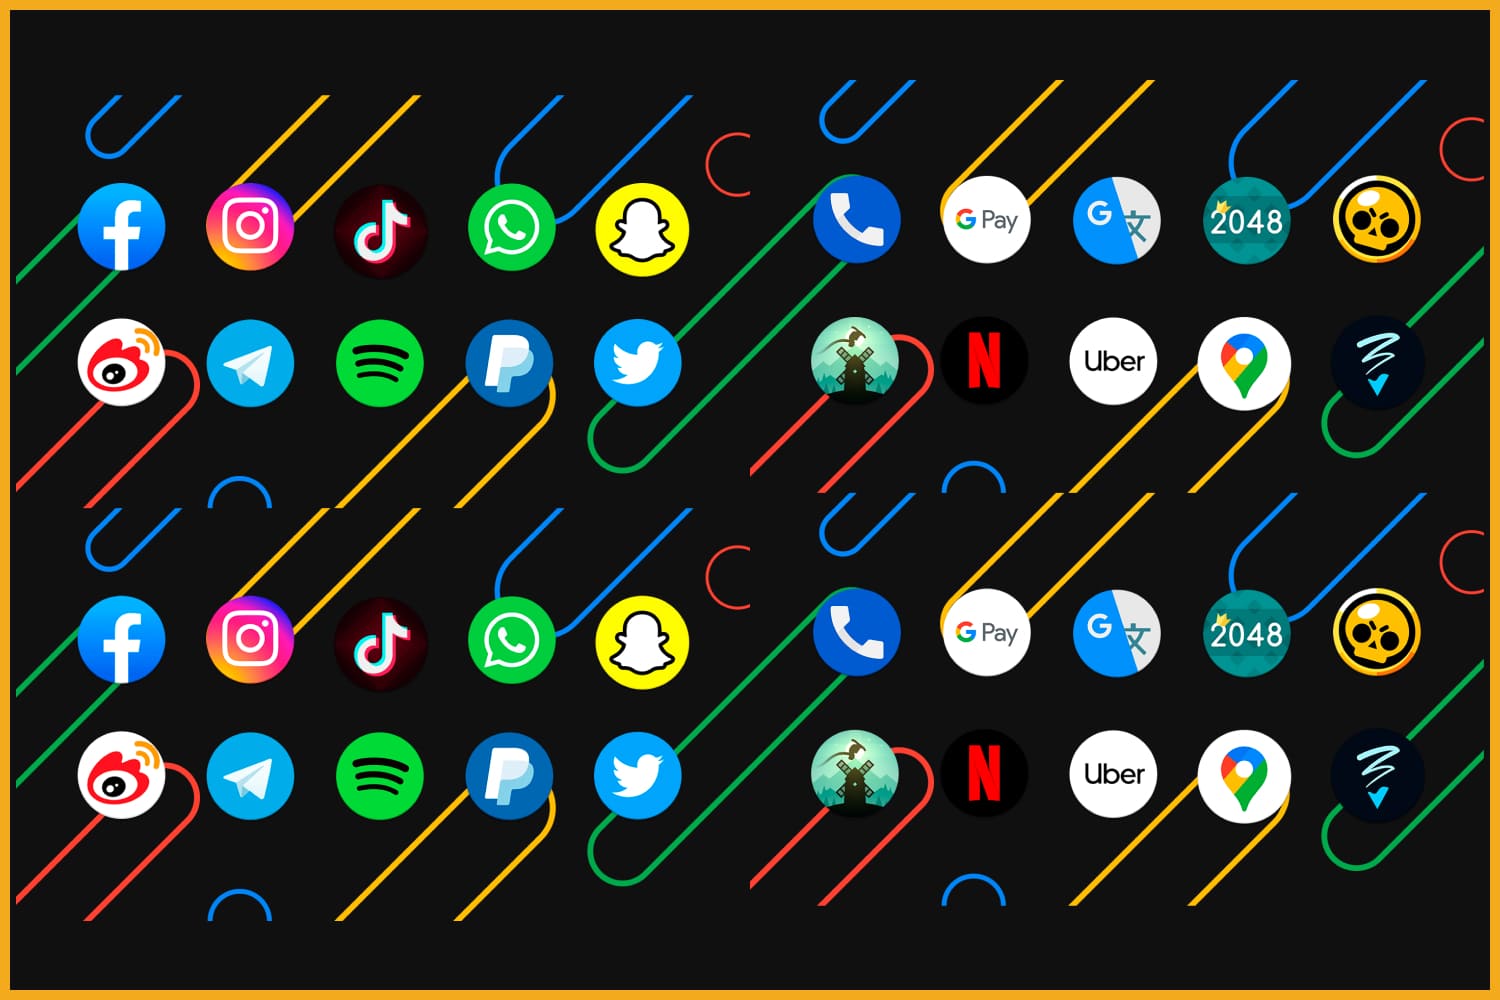 Collage of icons on a black background with colored stripes.